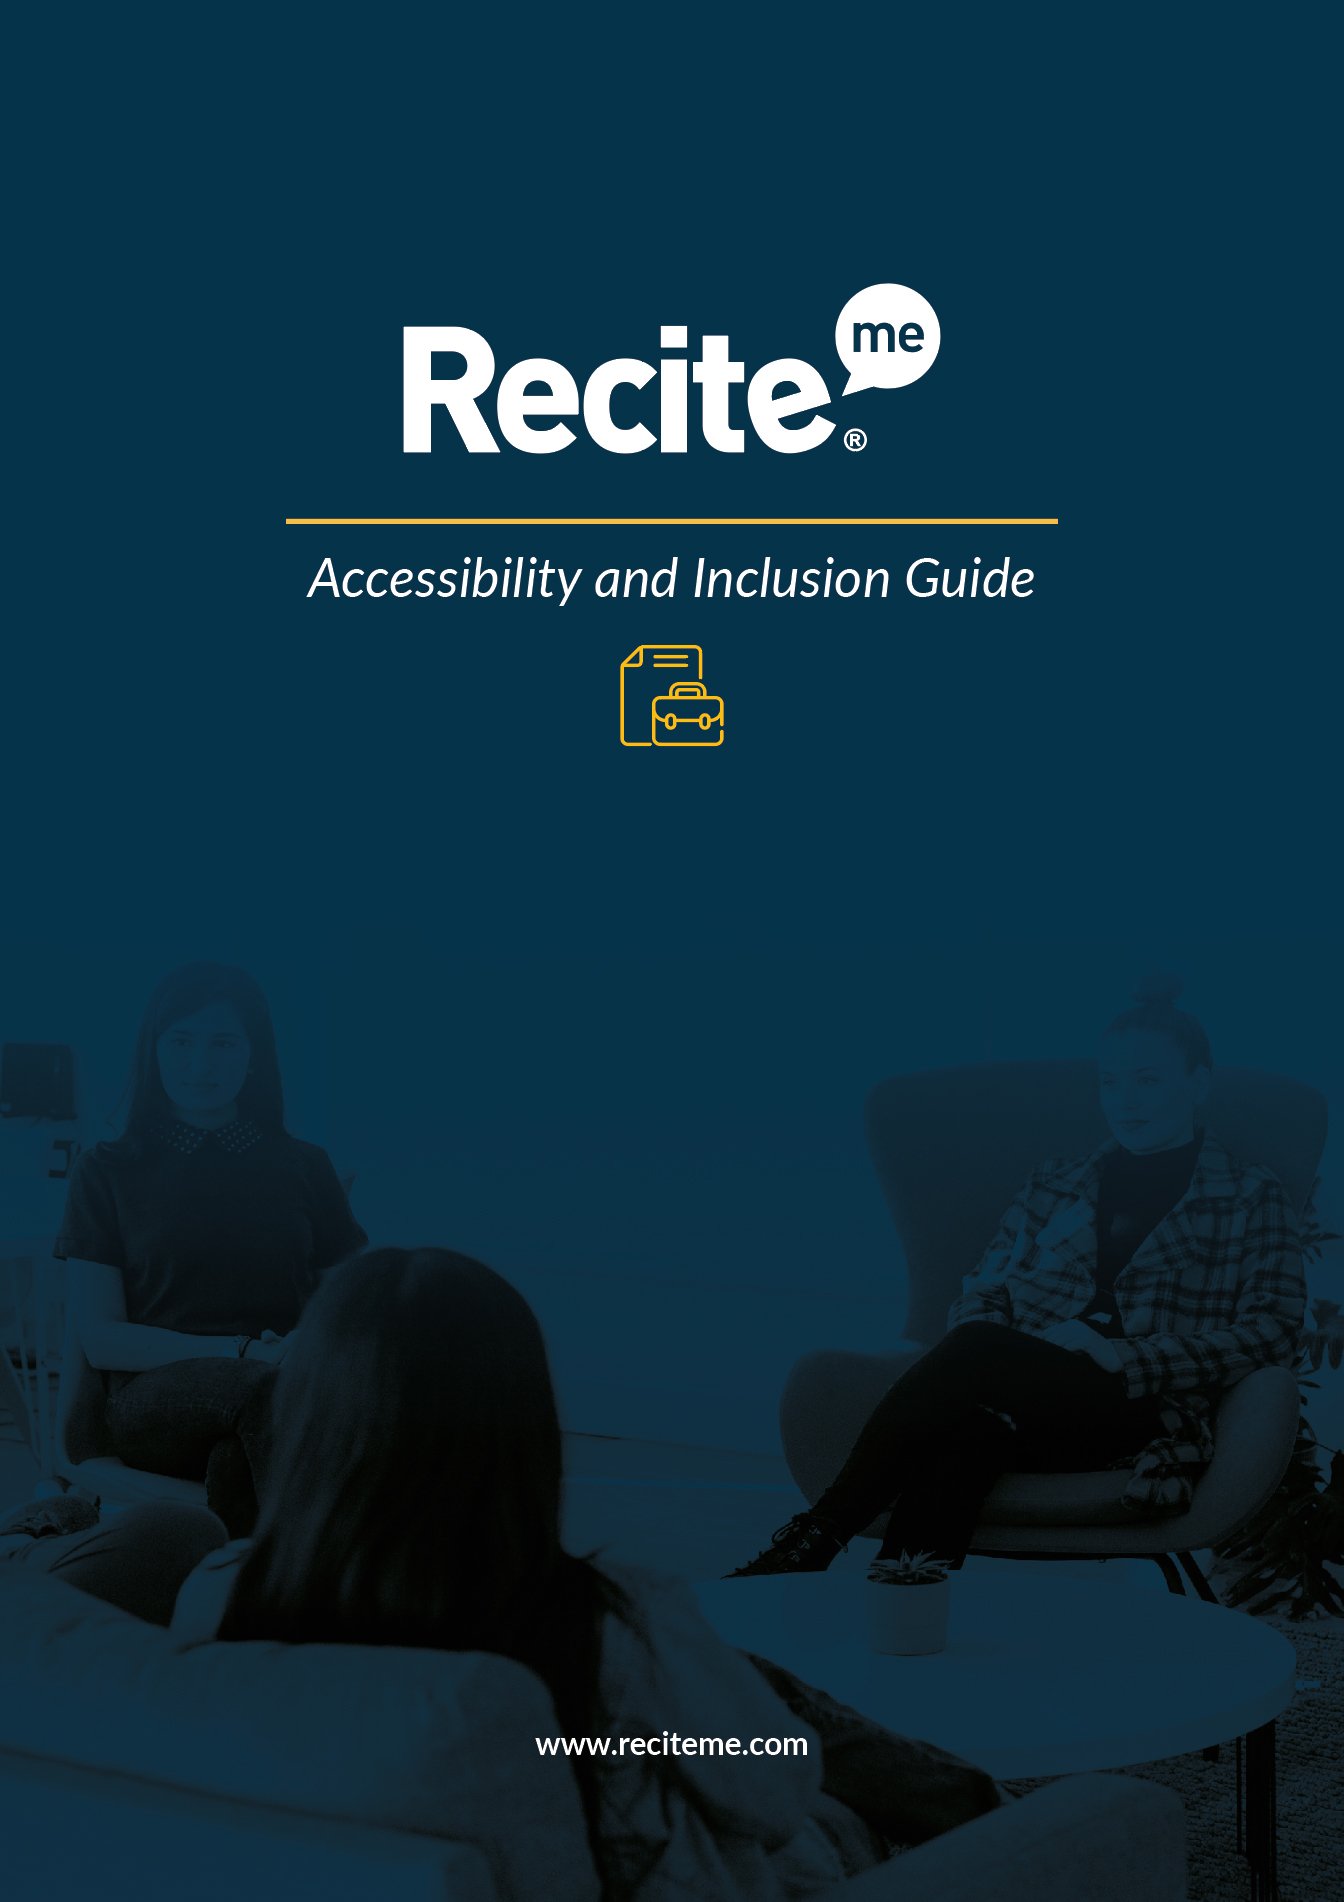 Front cover of the Accessibility and Inclusion Guide